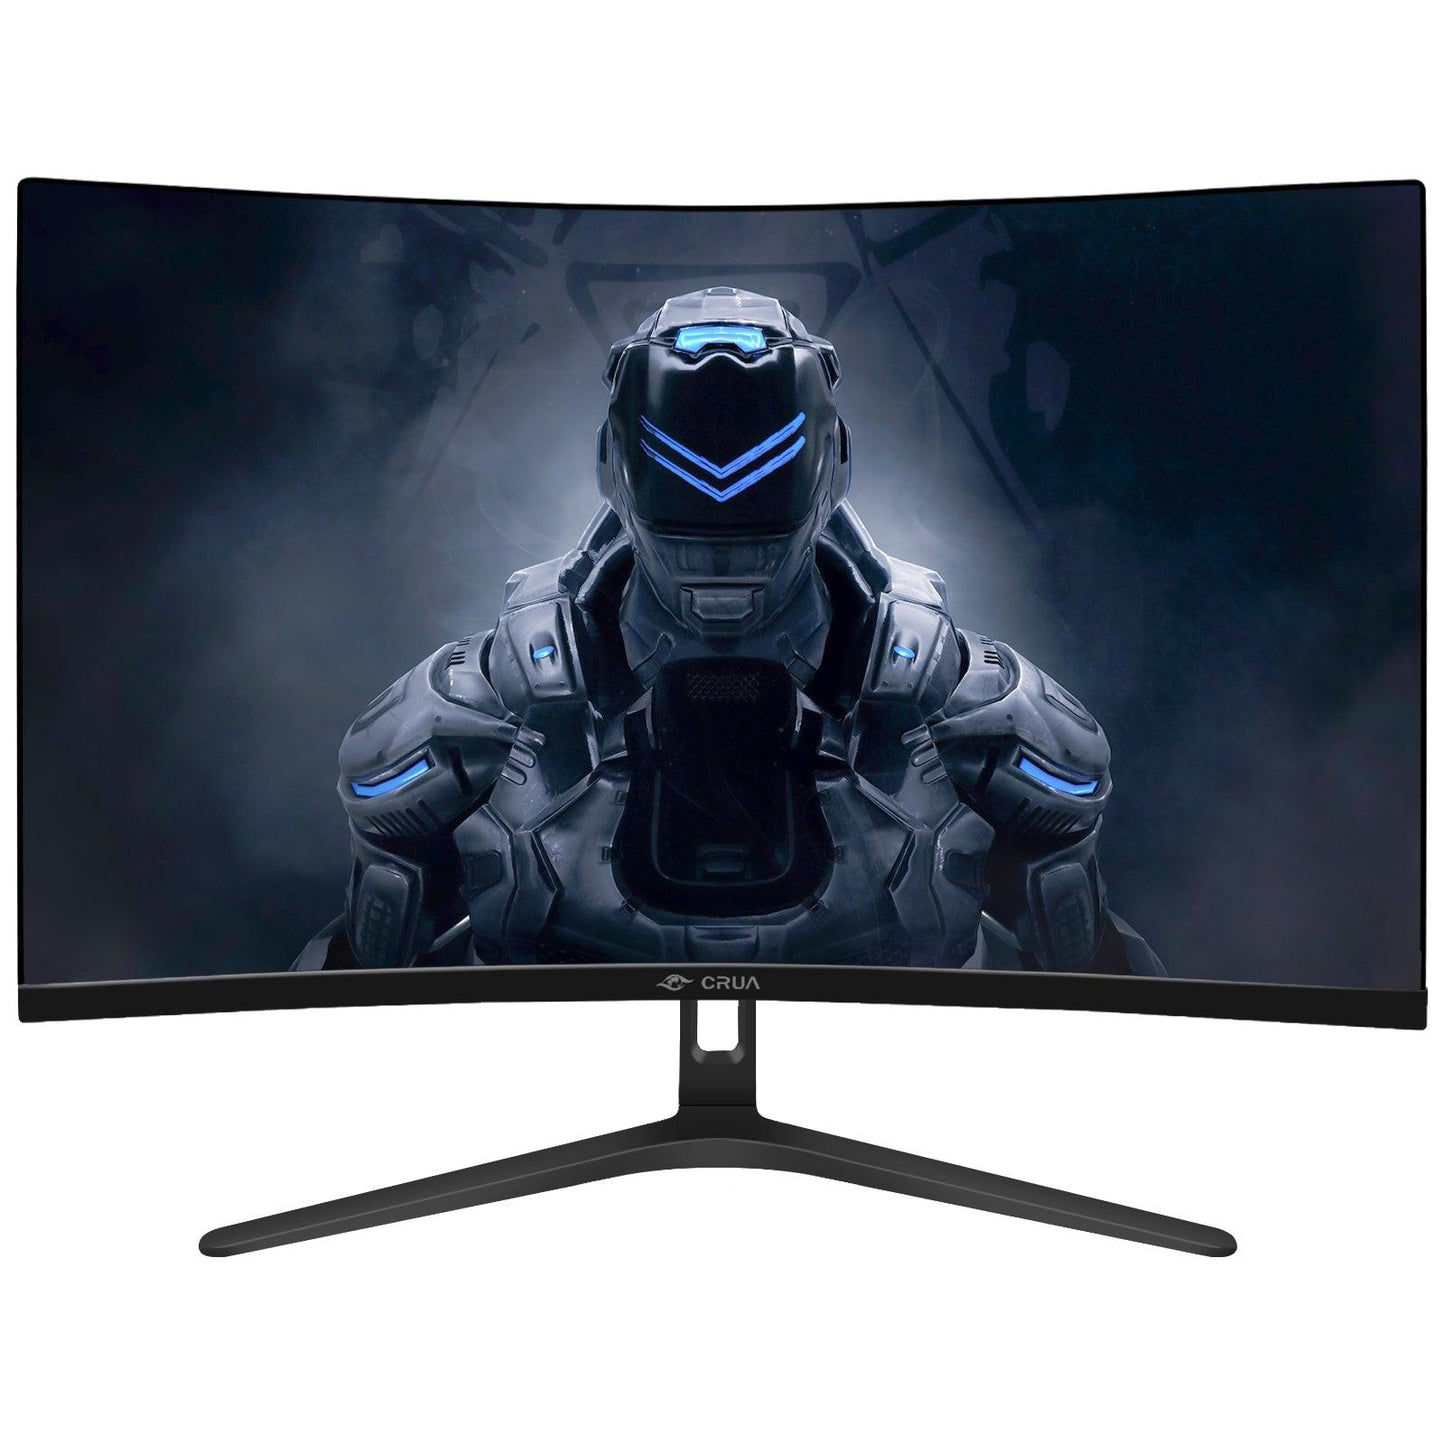 Built for eSports, there is no doubt that this is the best eSports monitor